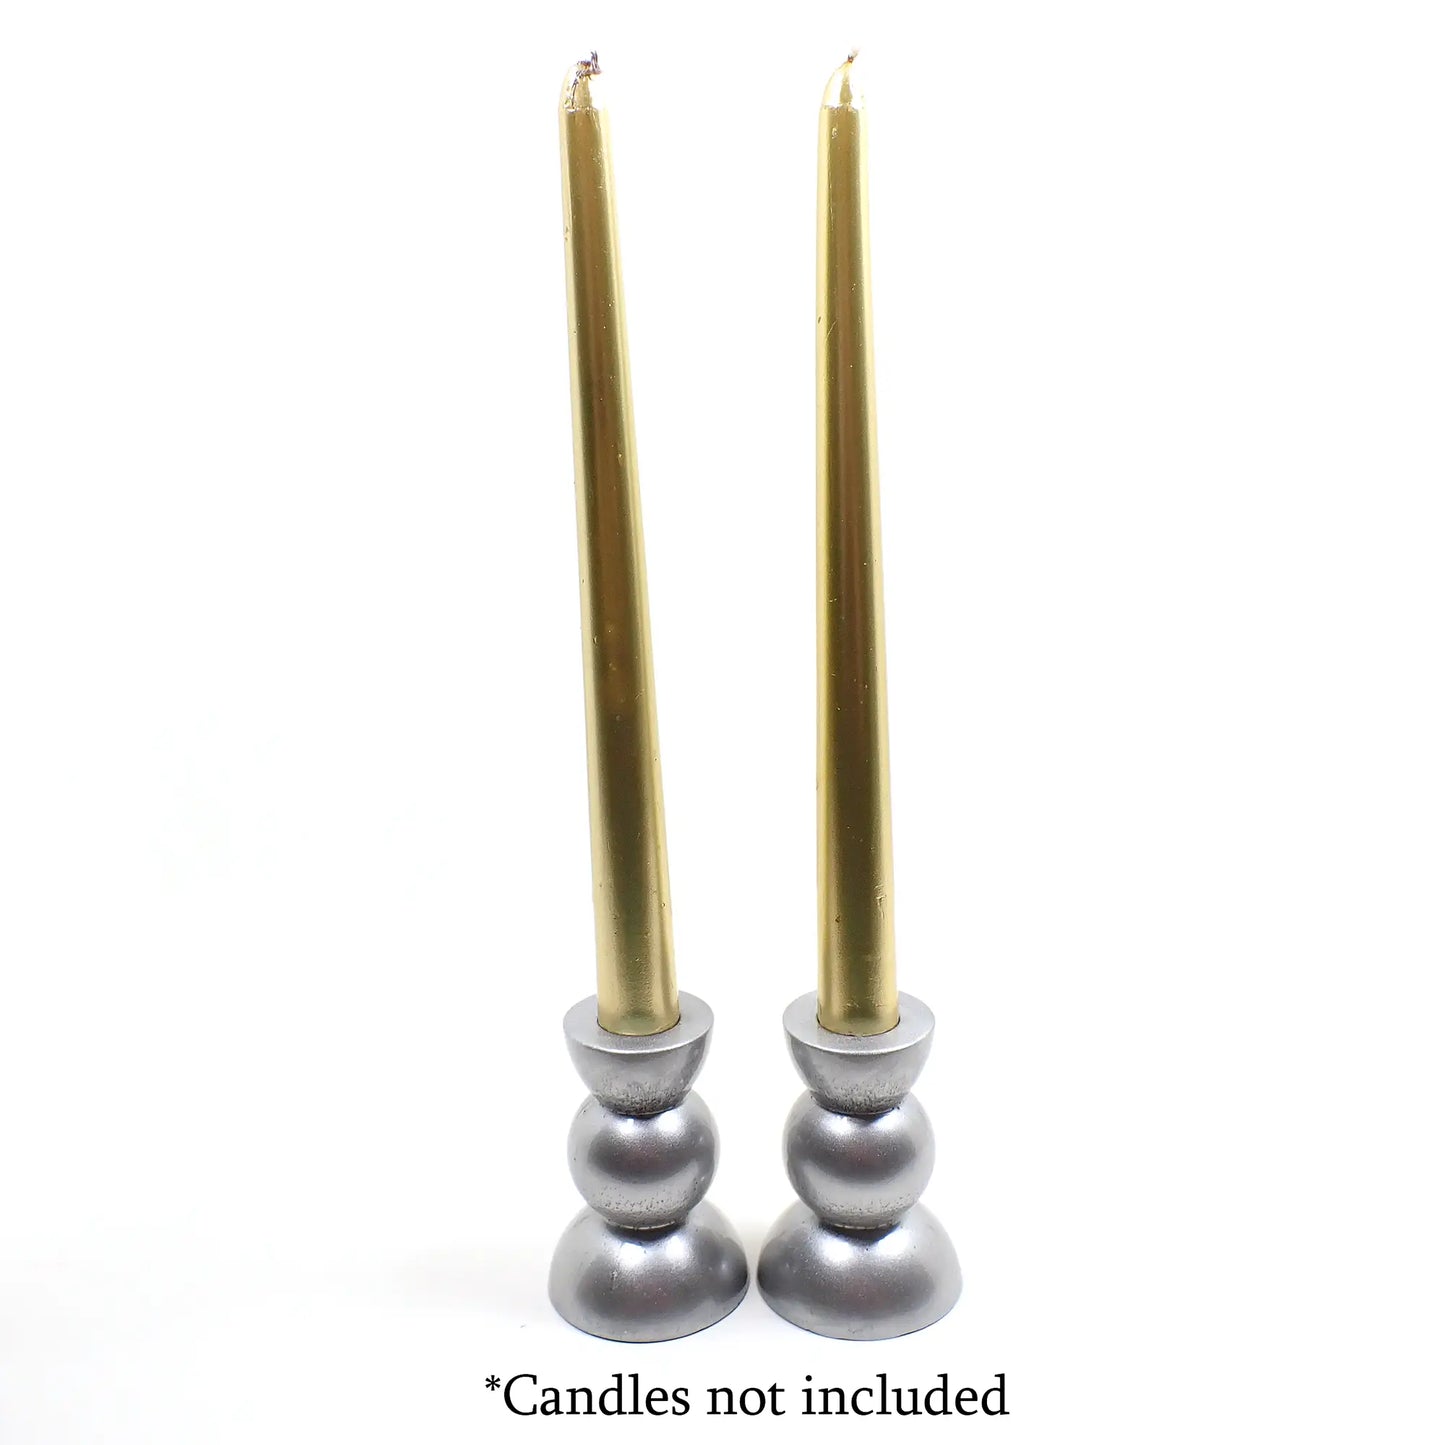 Set of Two Handmade Resin Pearly Metallic Silver Color Rounded Geometric Candlestick Holders